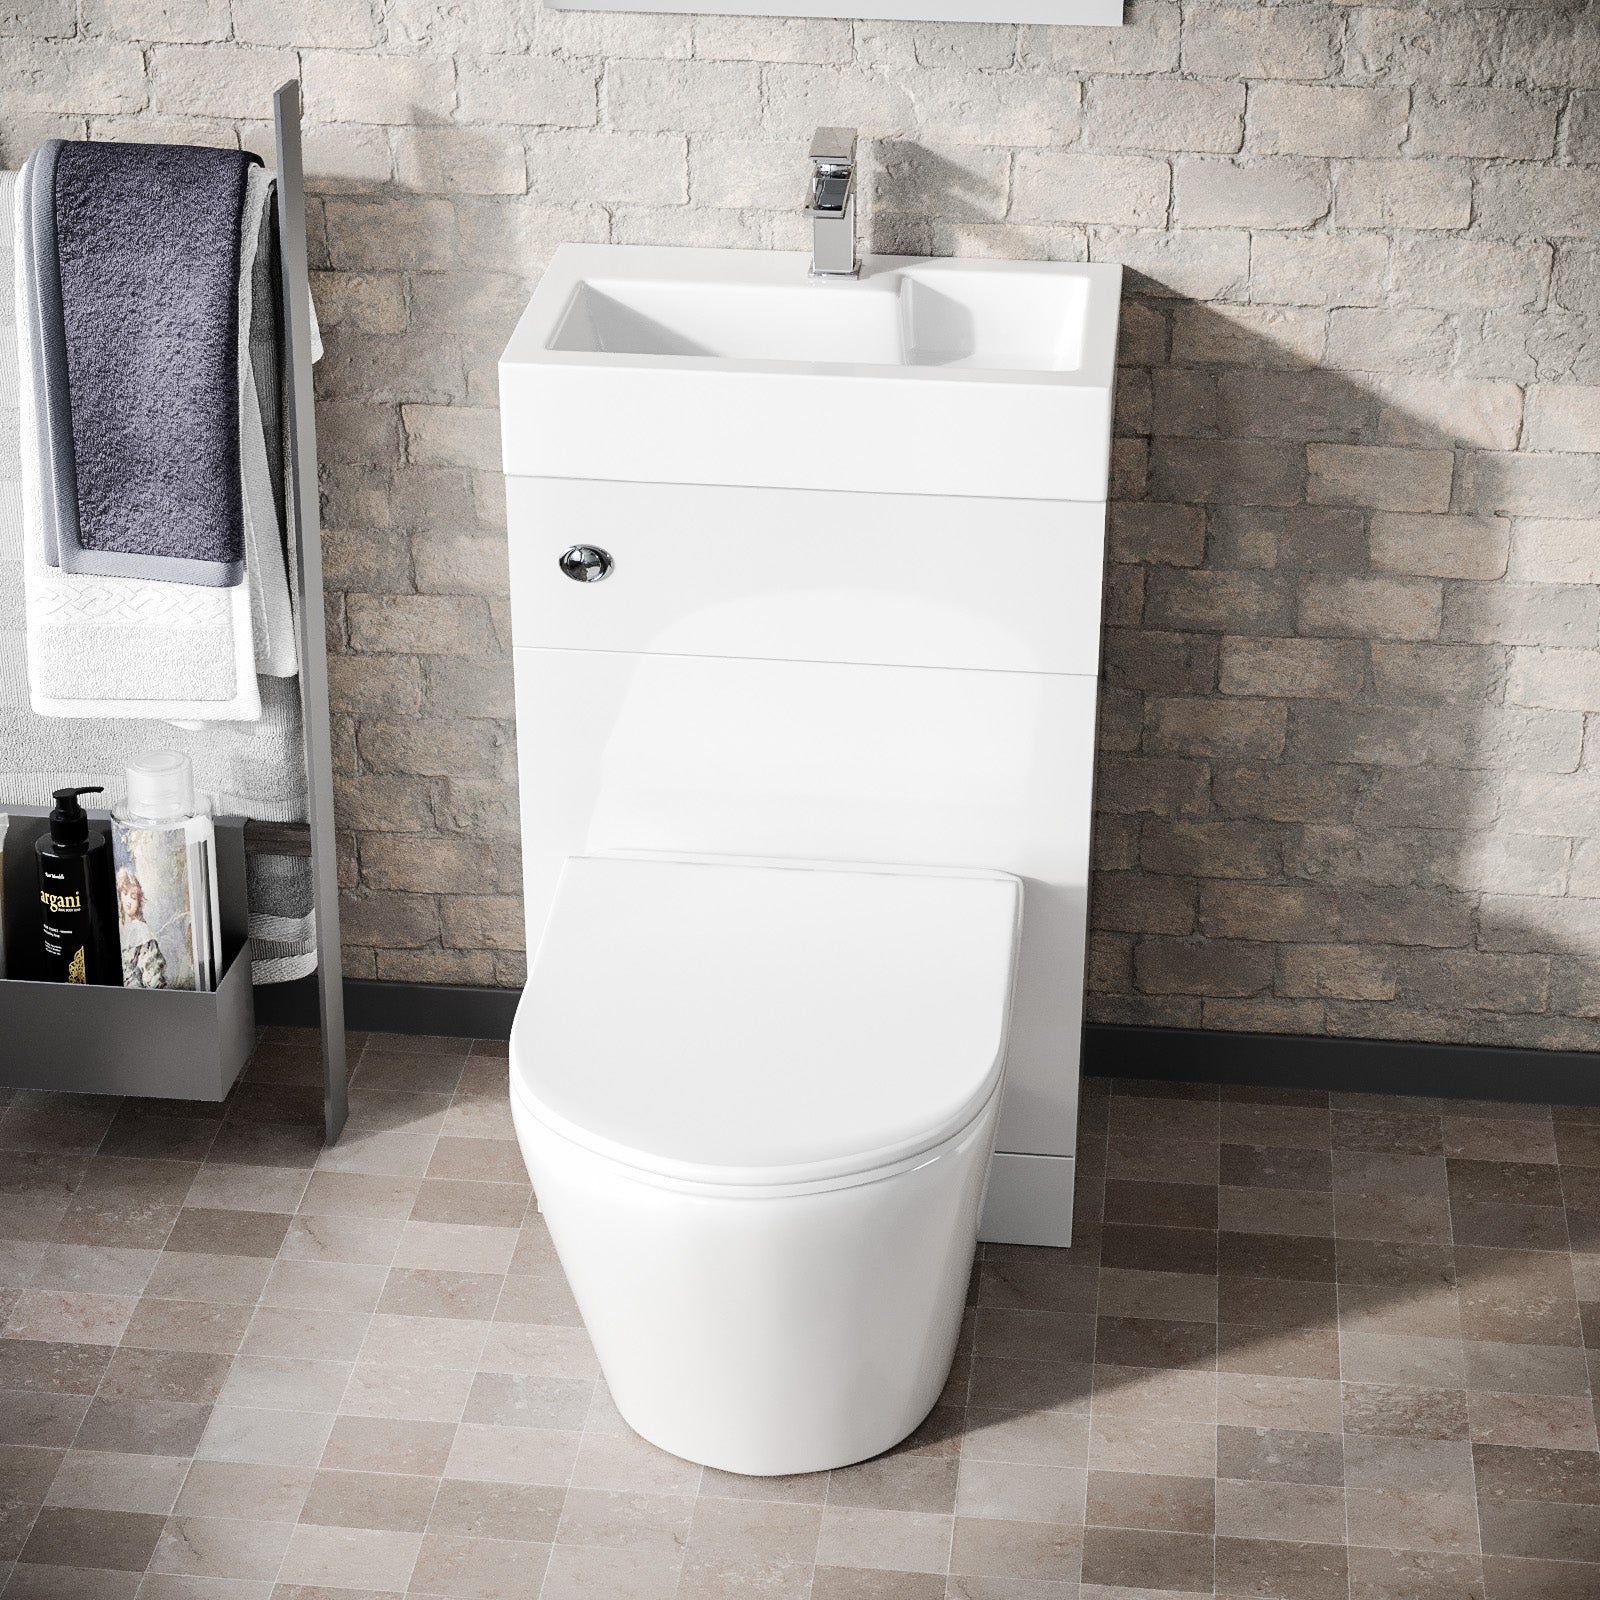 Debra 2 in 1 Compact Basin and Back to Wall Rimless Toilet Combo Space Save Cloakroom